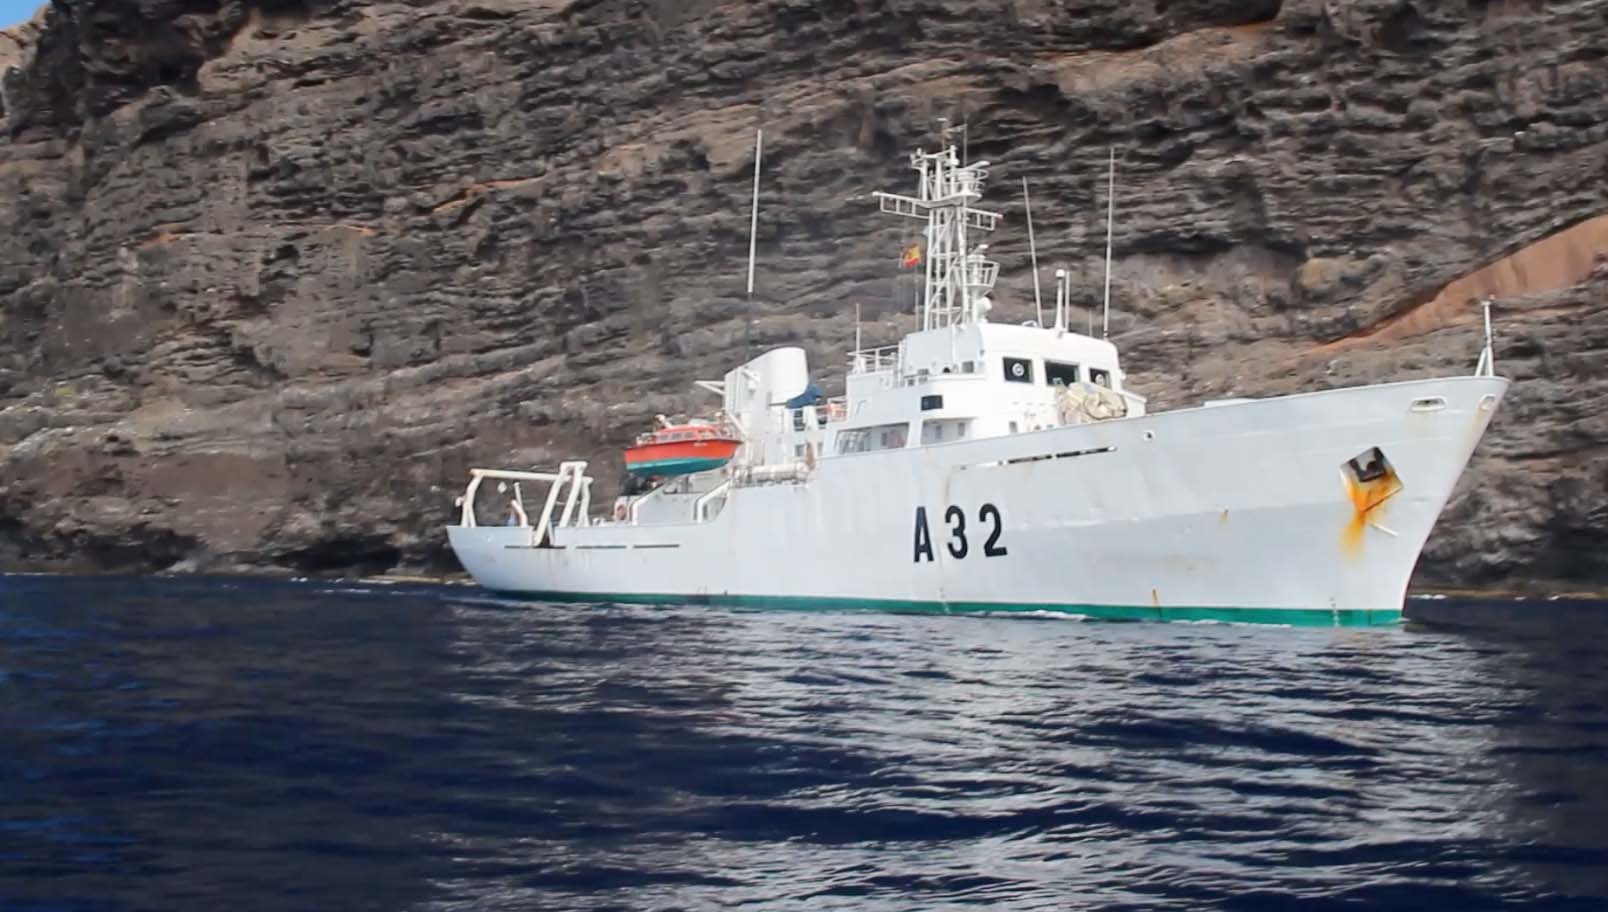 Imagen noticia:A commission from the Spanish Navy Hydrographic Institute will travel to La Palma to measure with drones the new coastline of the 